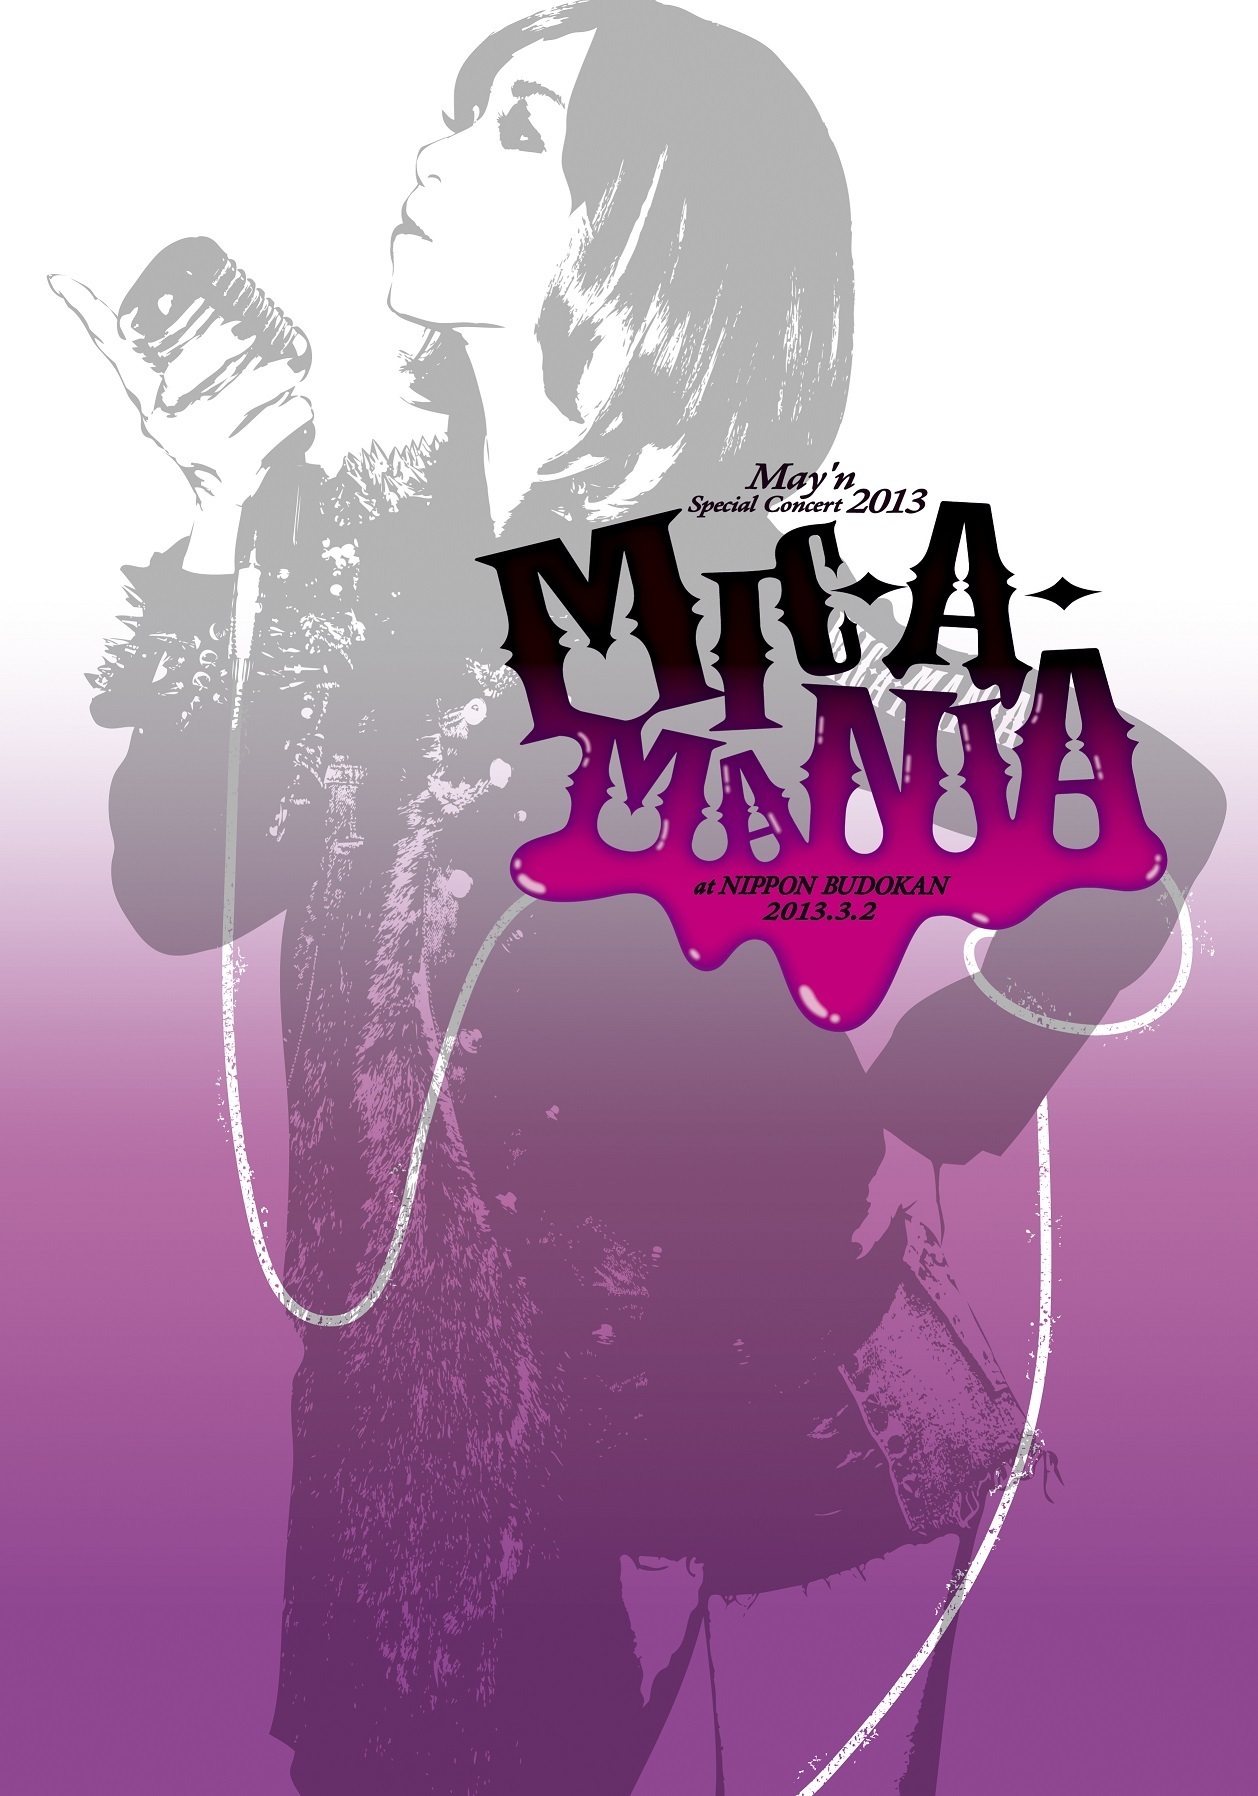 May’n Special Concert 2013 at 日本武道館 “MIC-A-MANIA”パンフレット